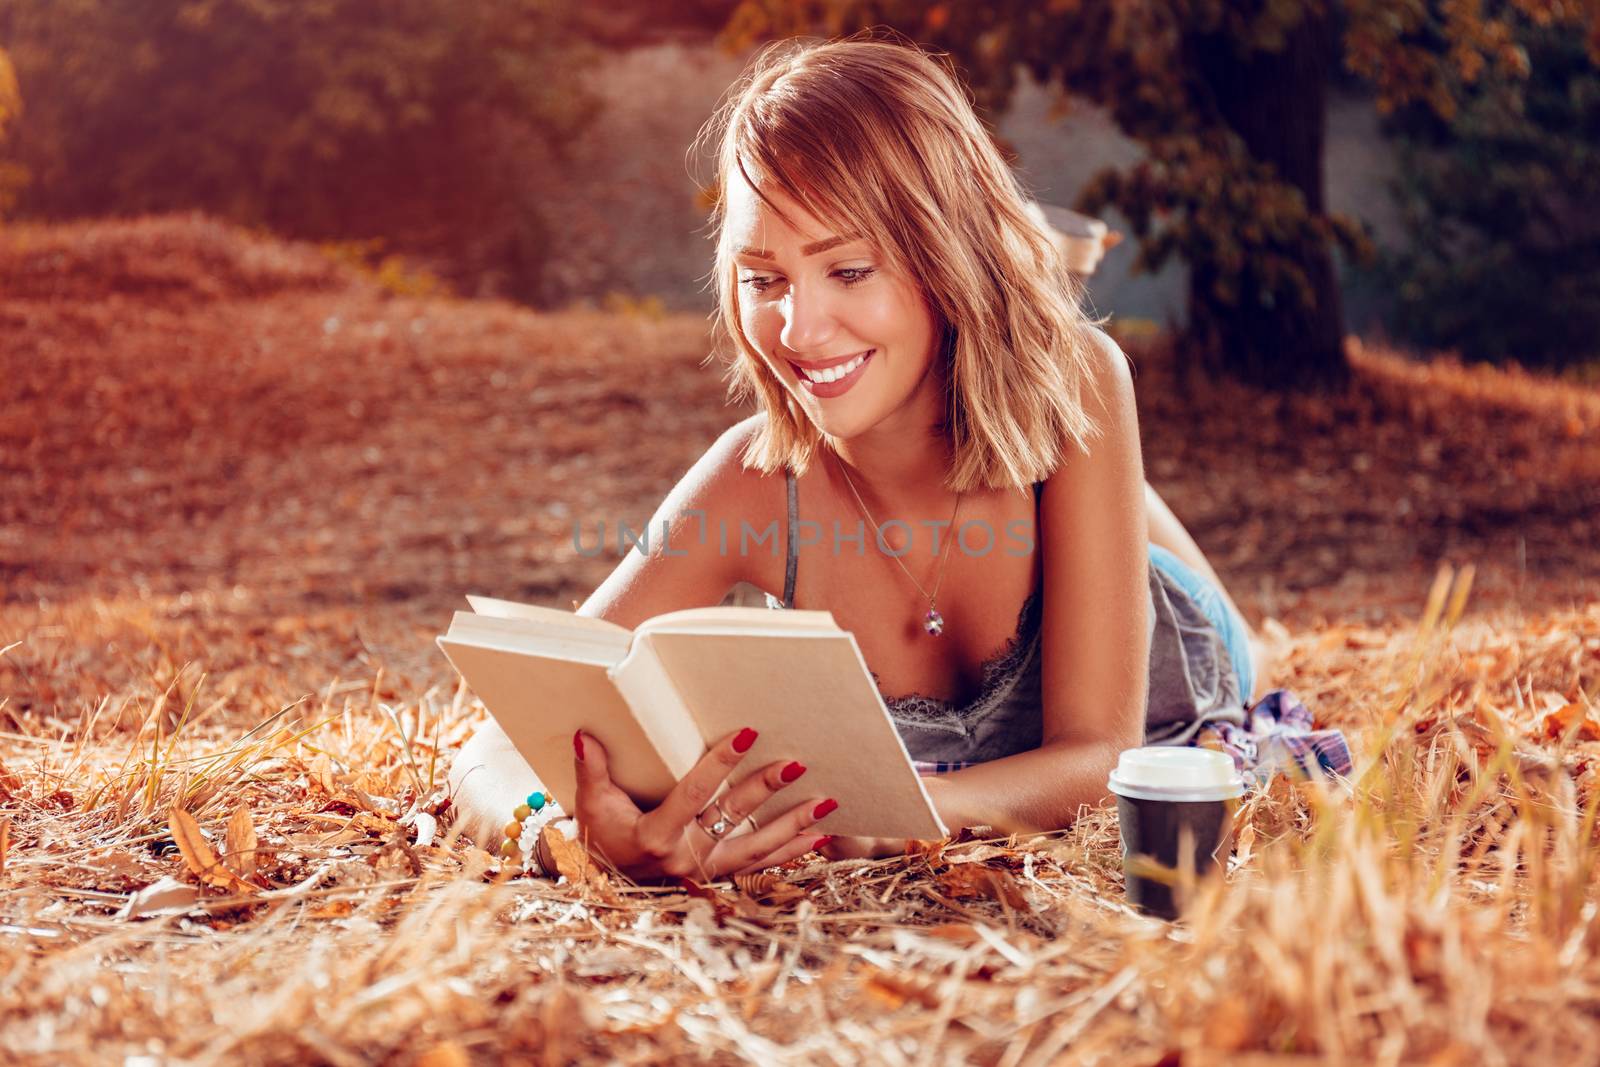 Cute smiling young woman lying on the withered grasses in autumn and reading book.